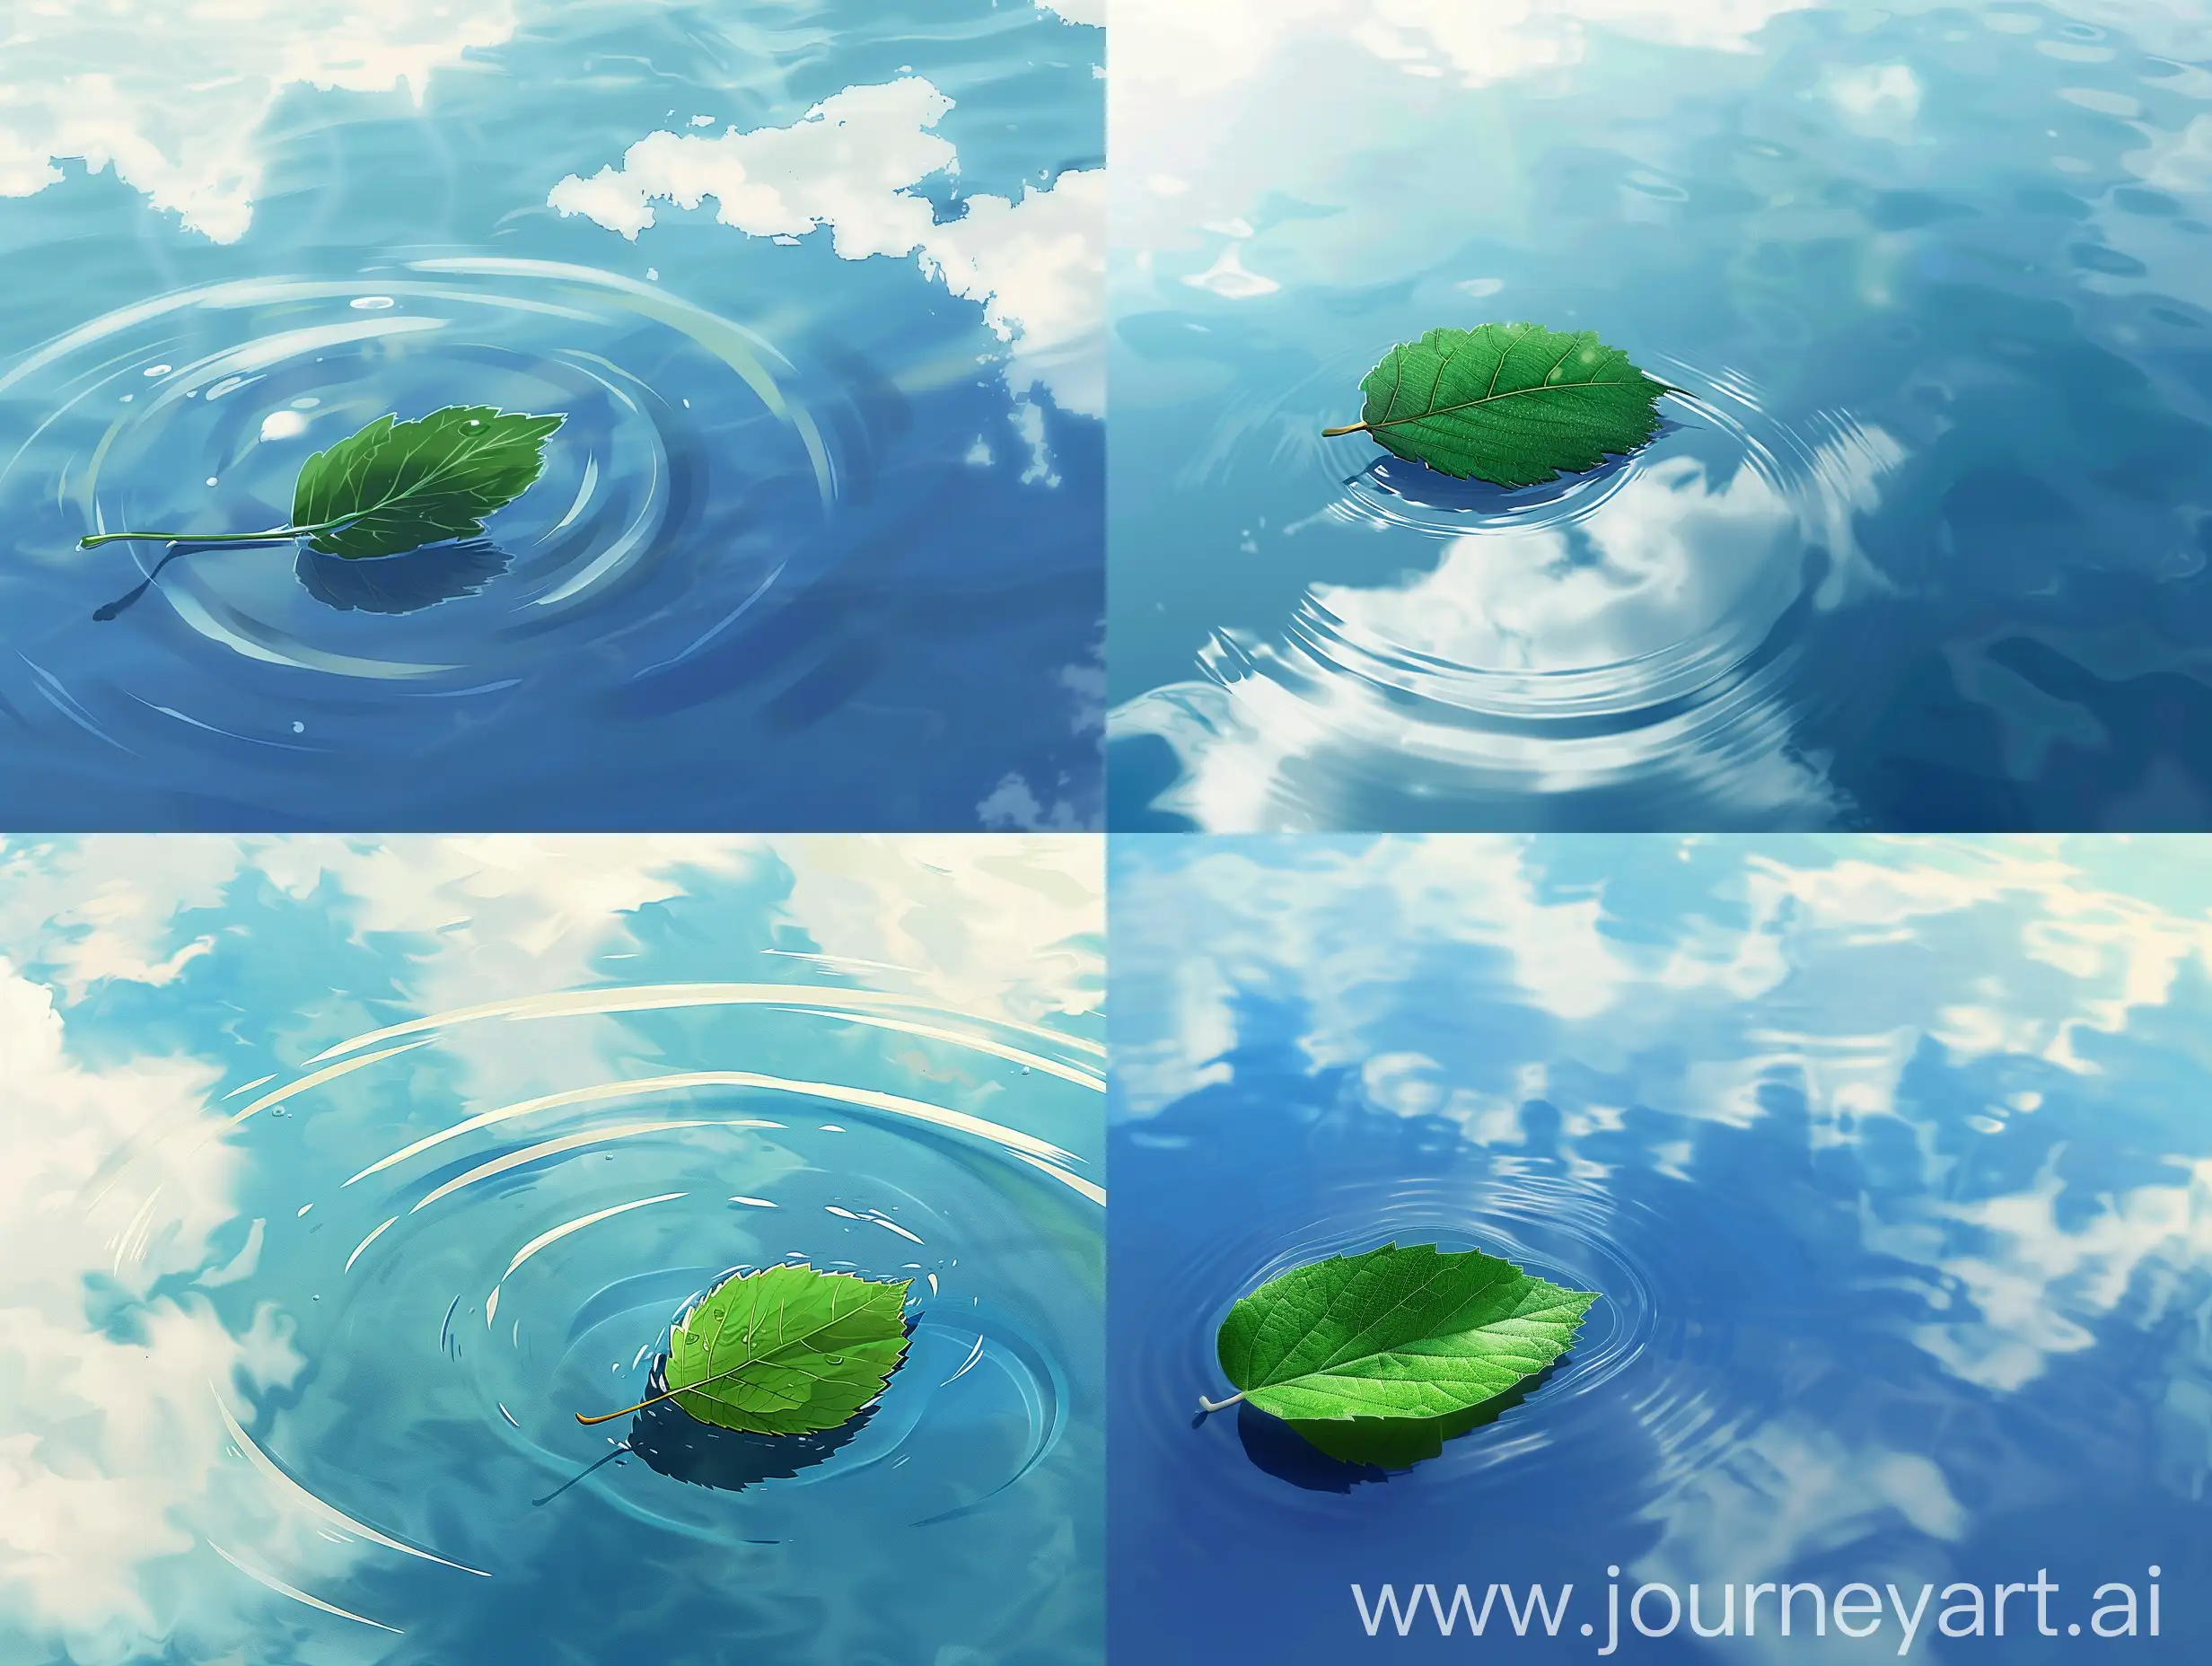 green, leaf, floating, water, surface, blue, sky, reflection, white, clouds, vibrations, ripples, just, fallen, serene, tranquil, natural, daylight, bright, vivid, anime style